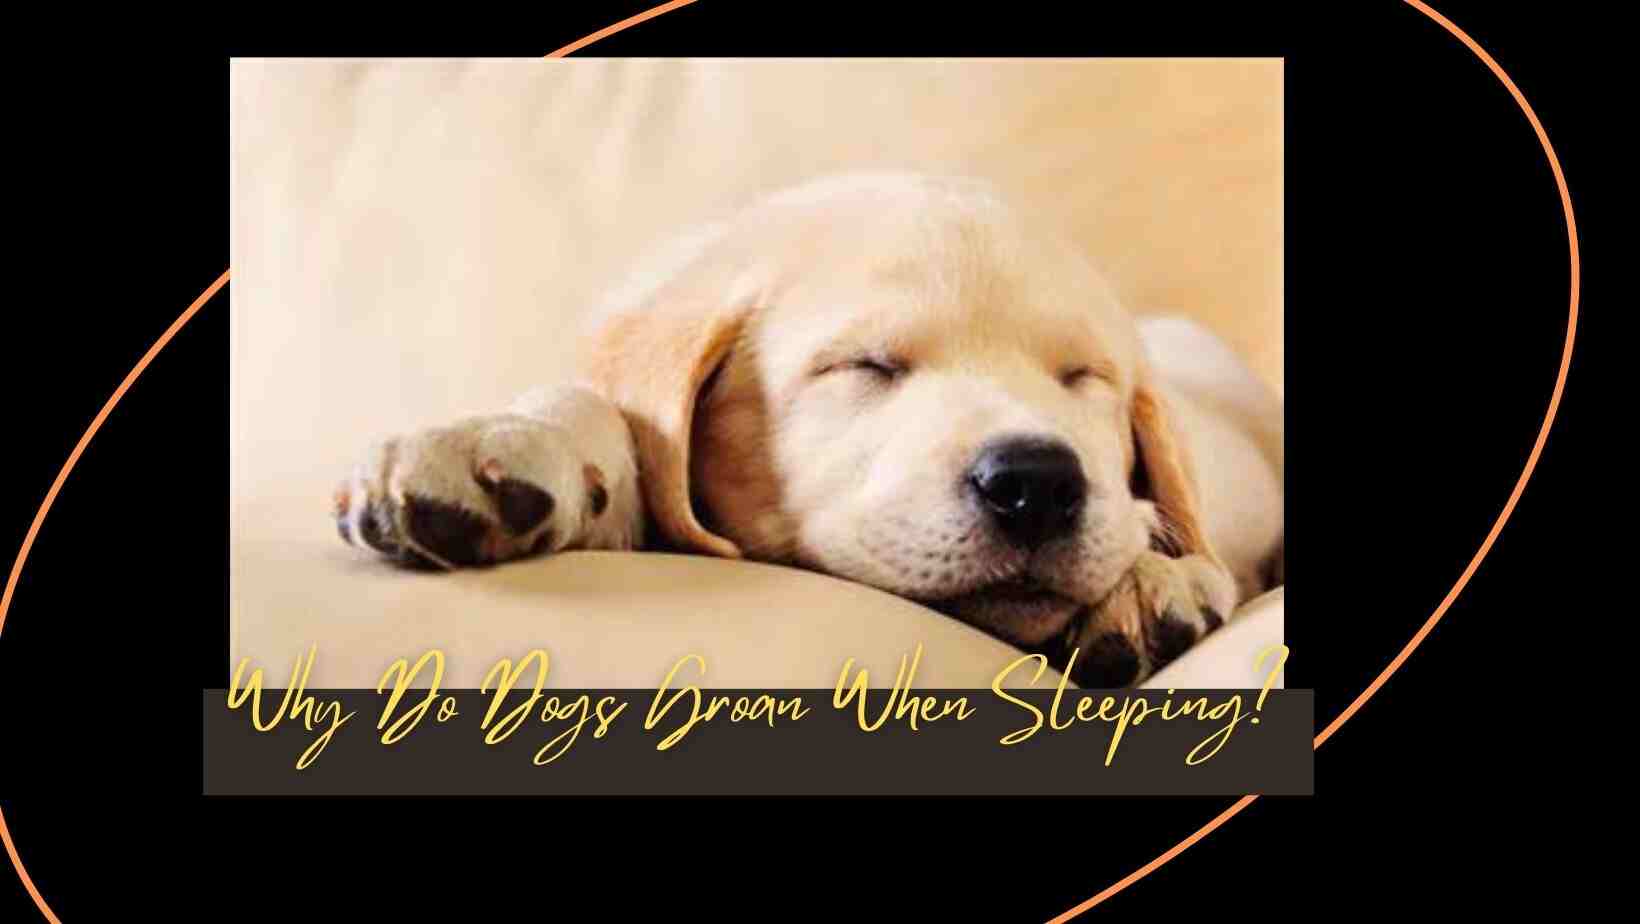 Why Do Dogs Groan When Sleeping?